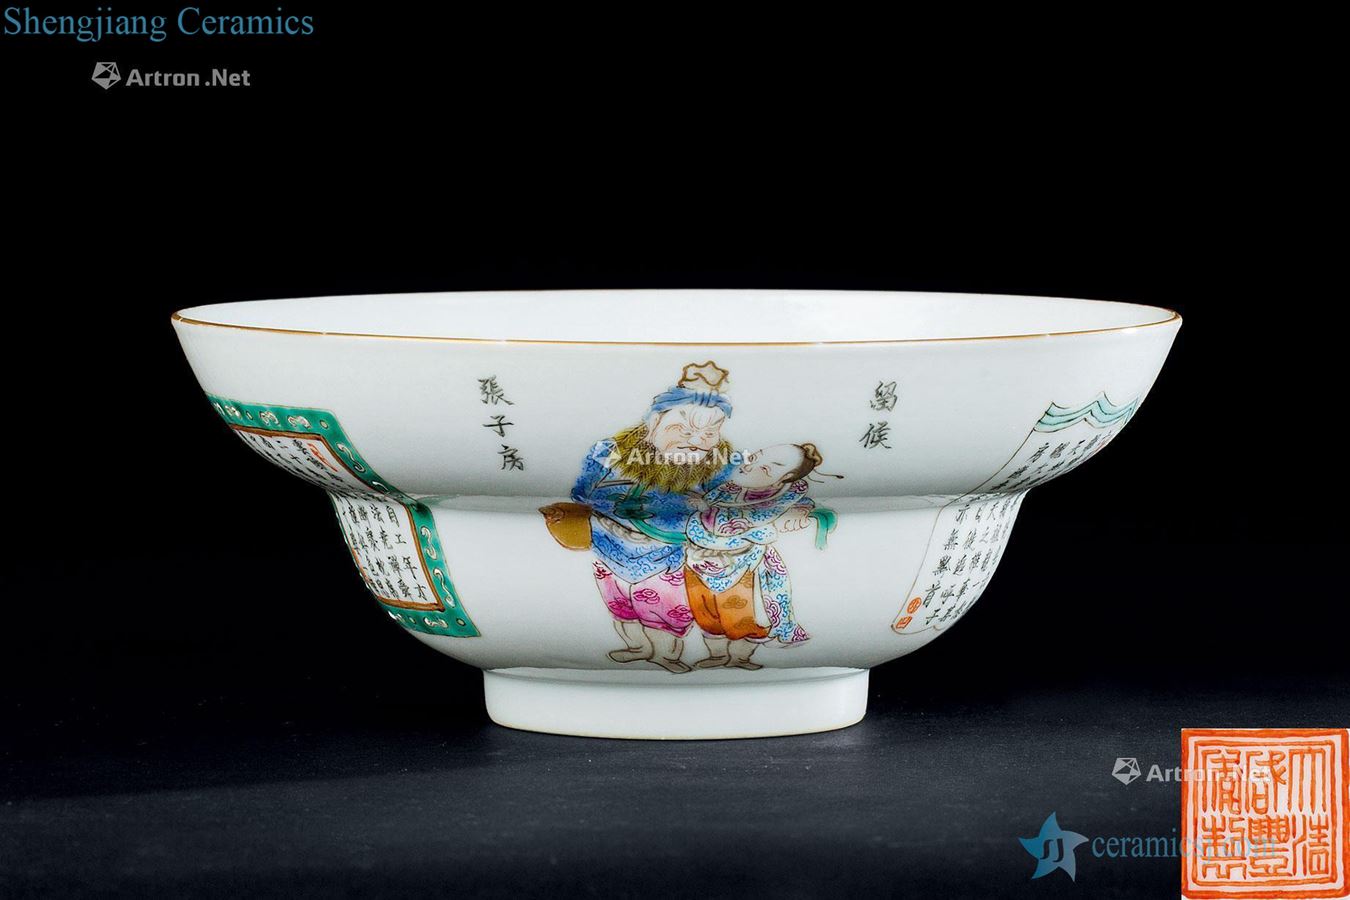 In the qing dynasty (1644-1911), pastel characters story lines or bowl